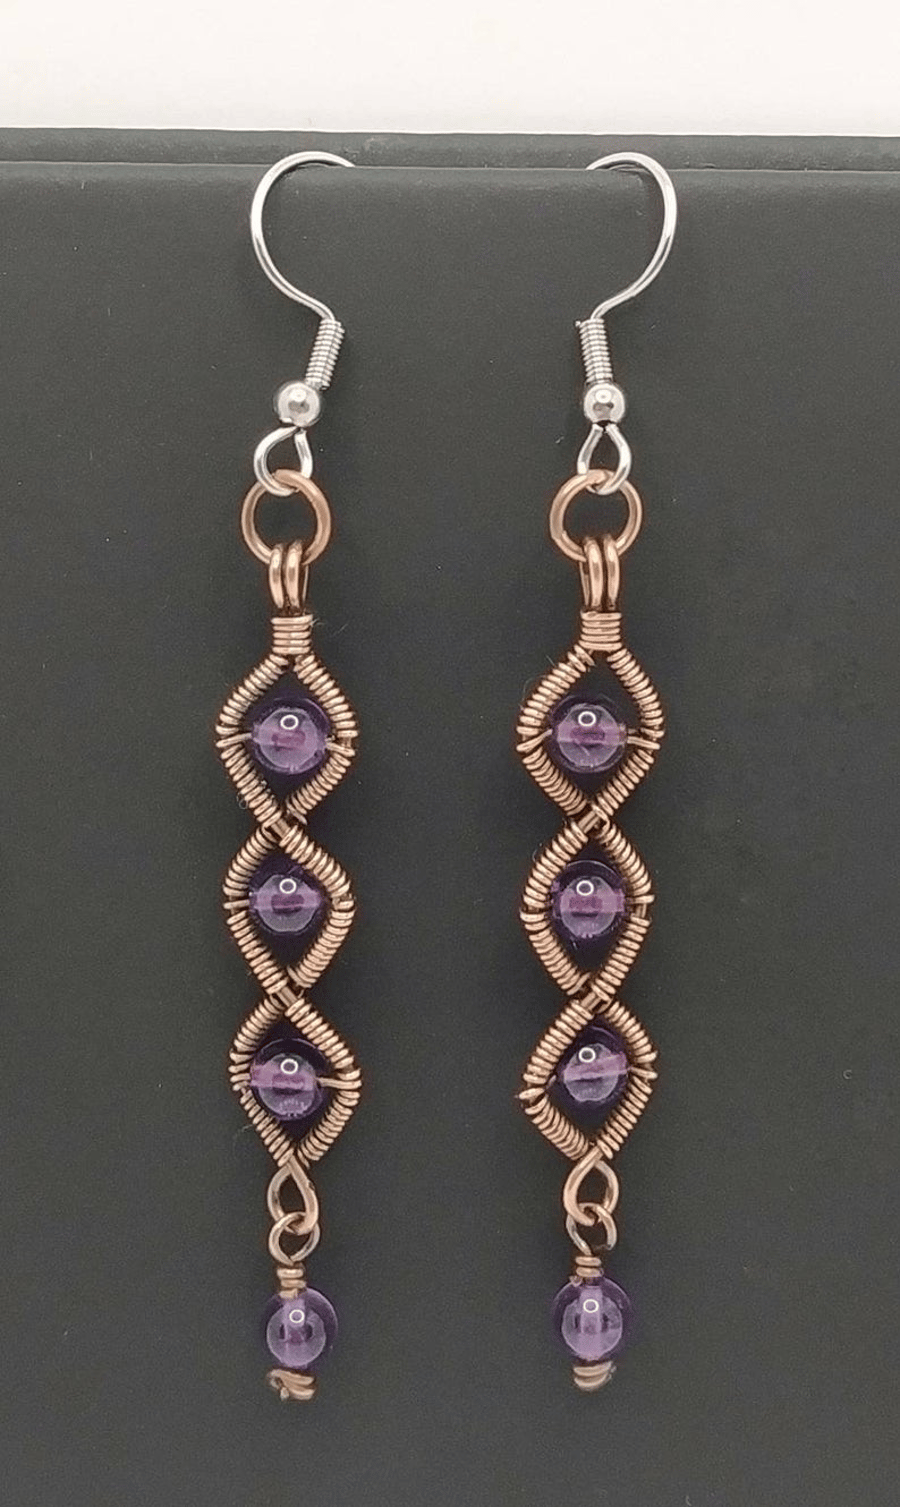 Twisted Wire Wrapped Earrings with Amethyst in Oxidised Copper